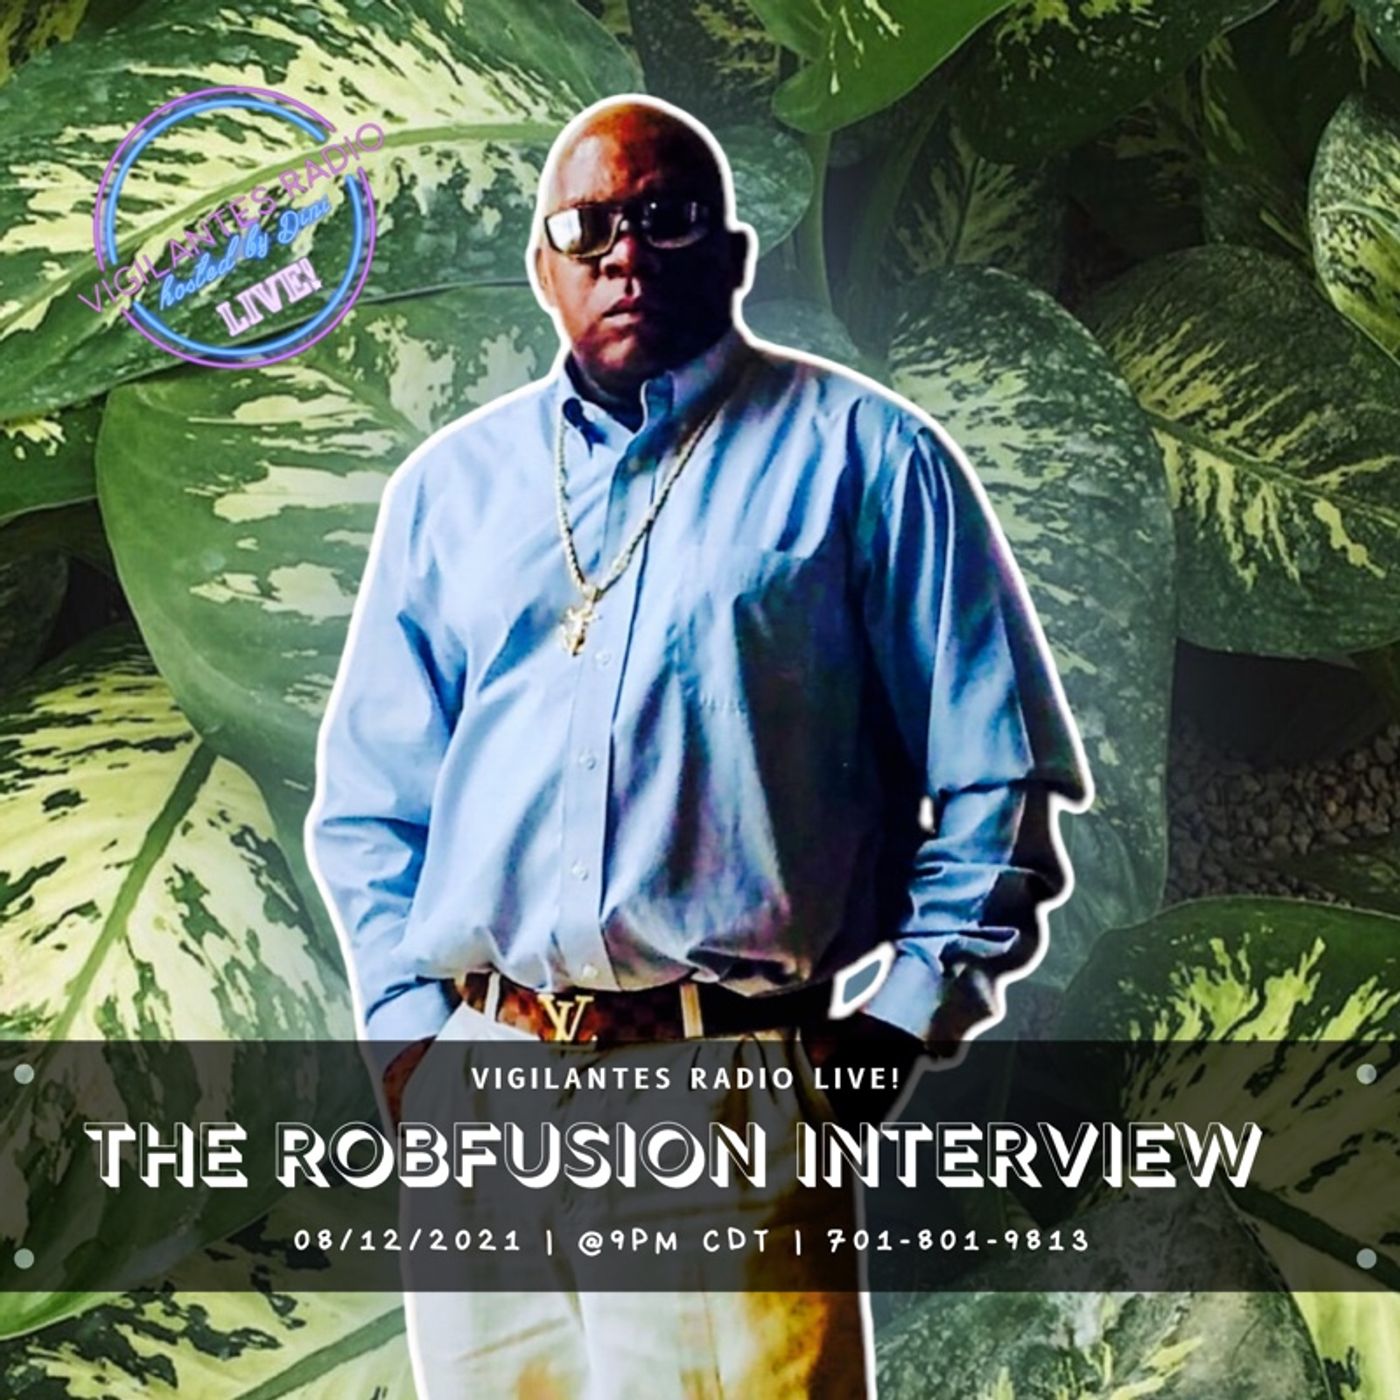 The Robfusion Interview. Image